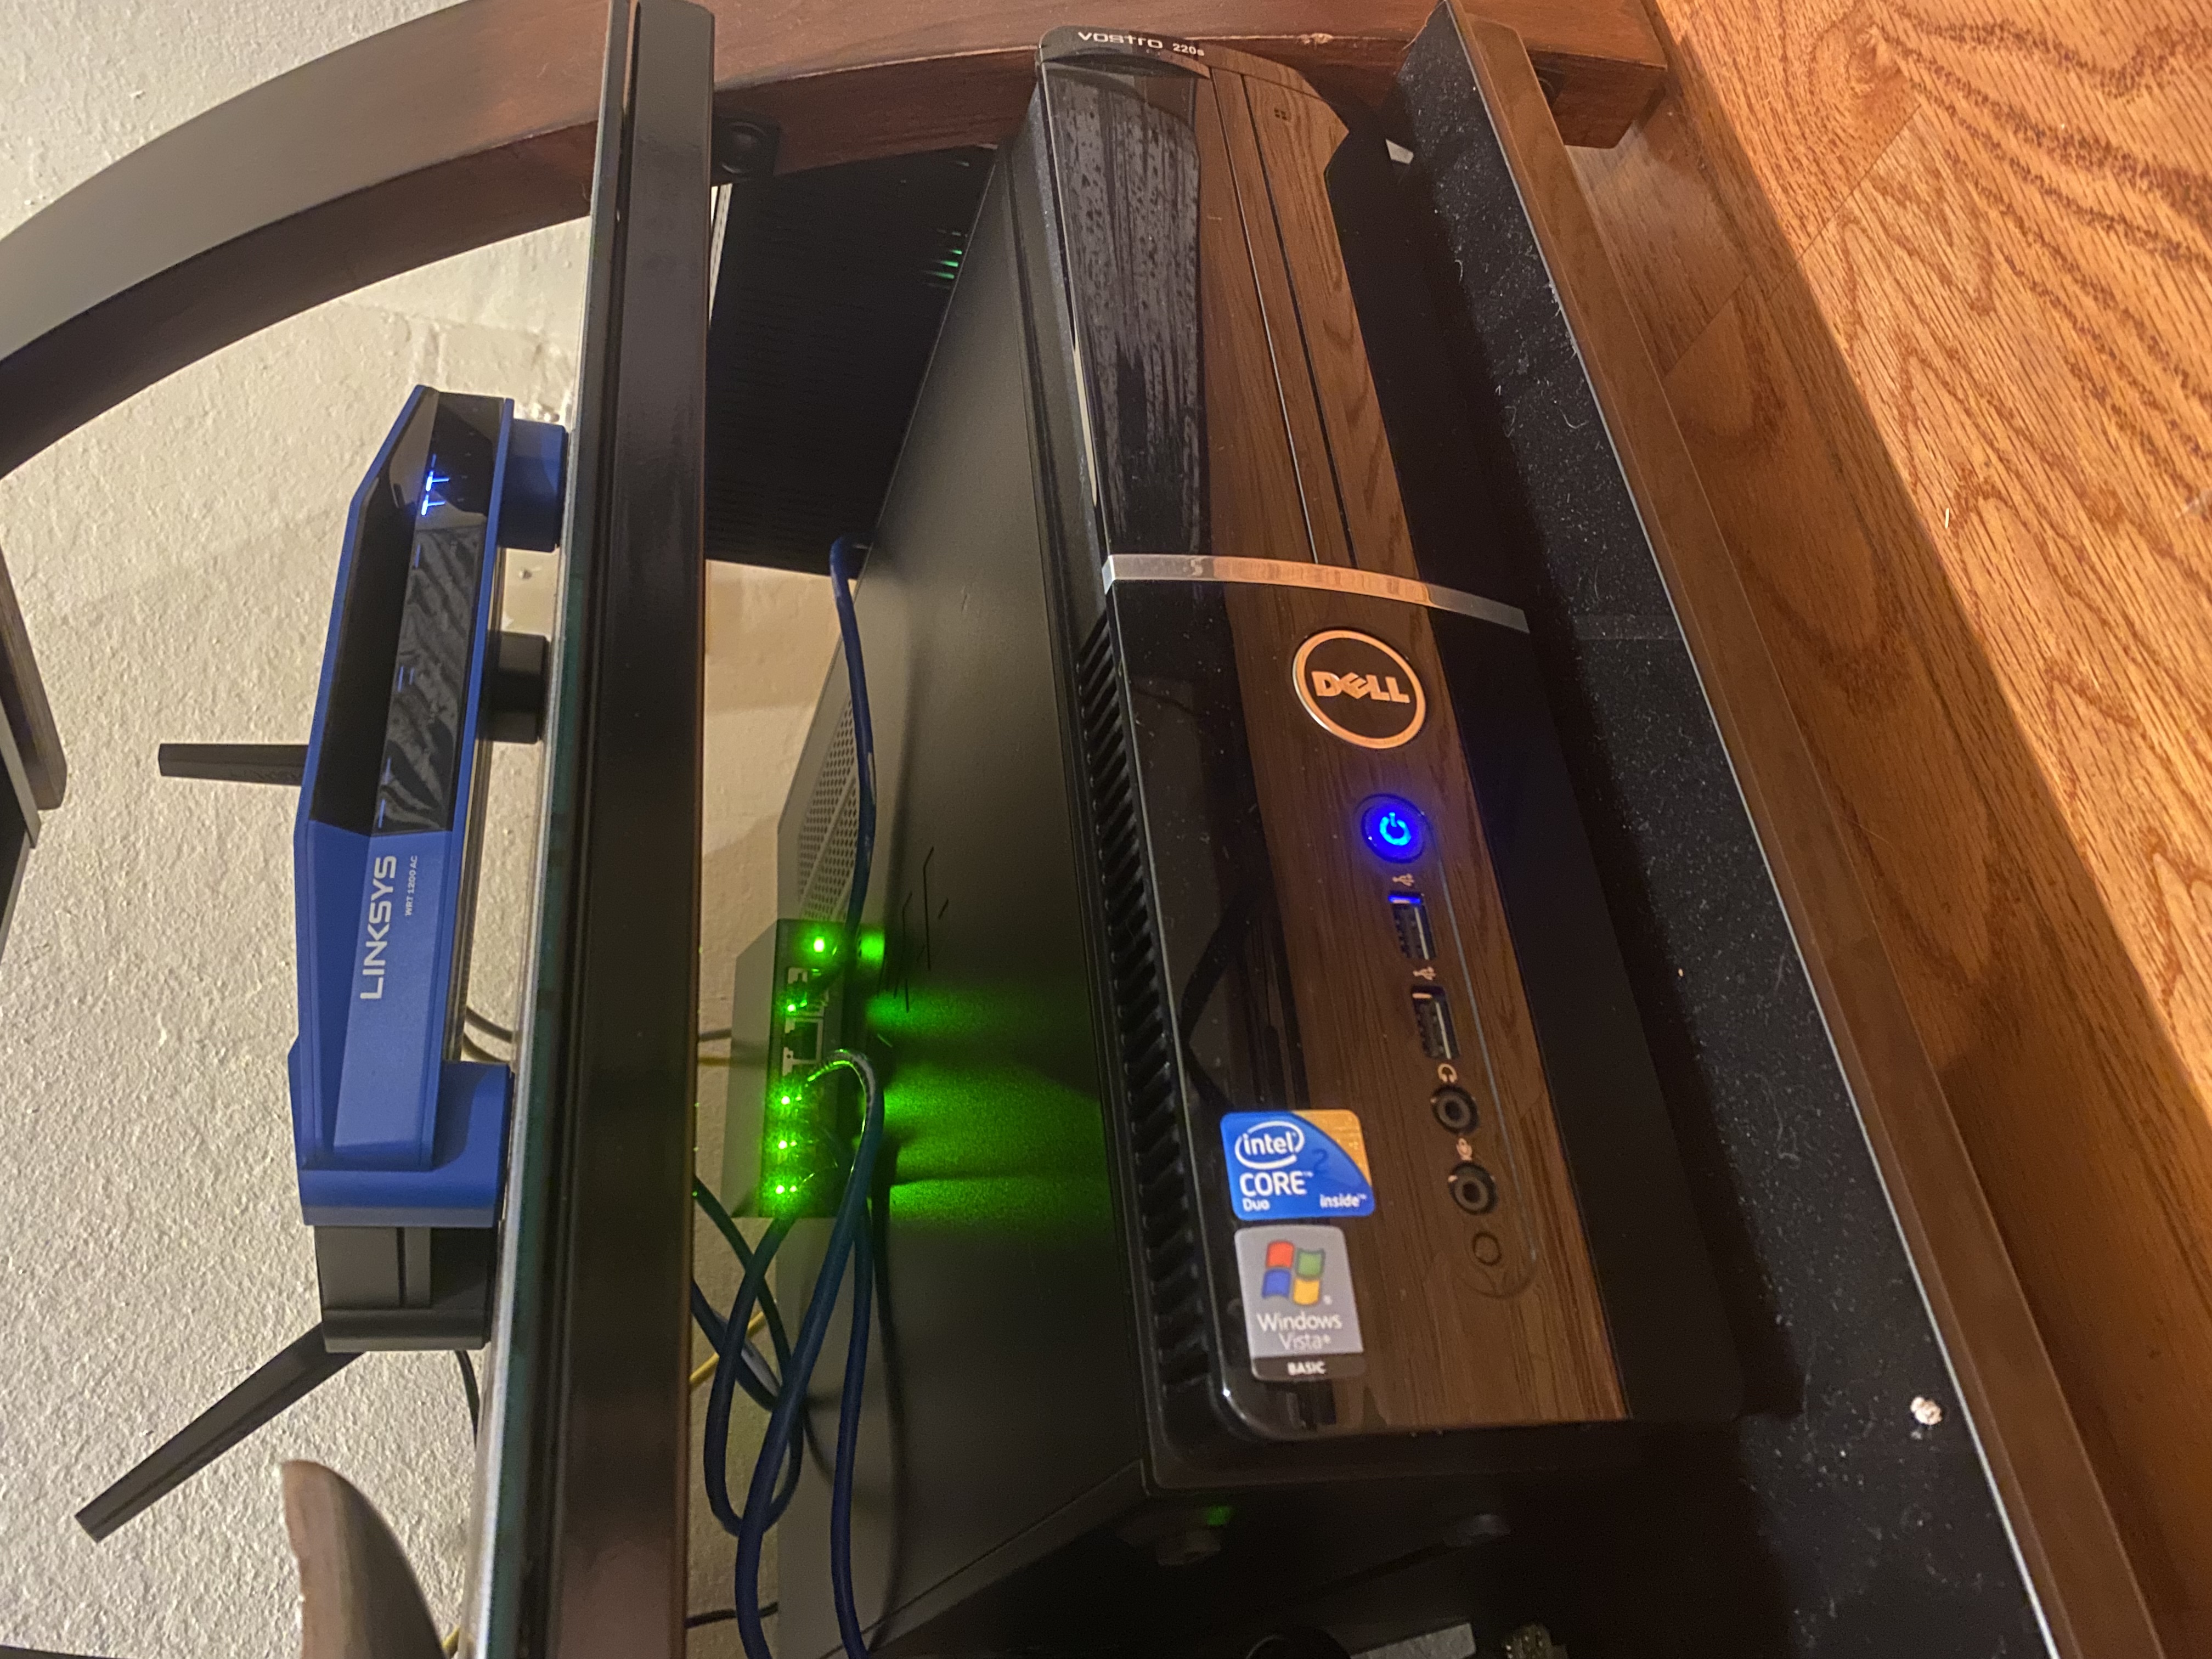 my home router, the unmanaged switch, the Opnsense “router”